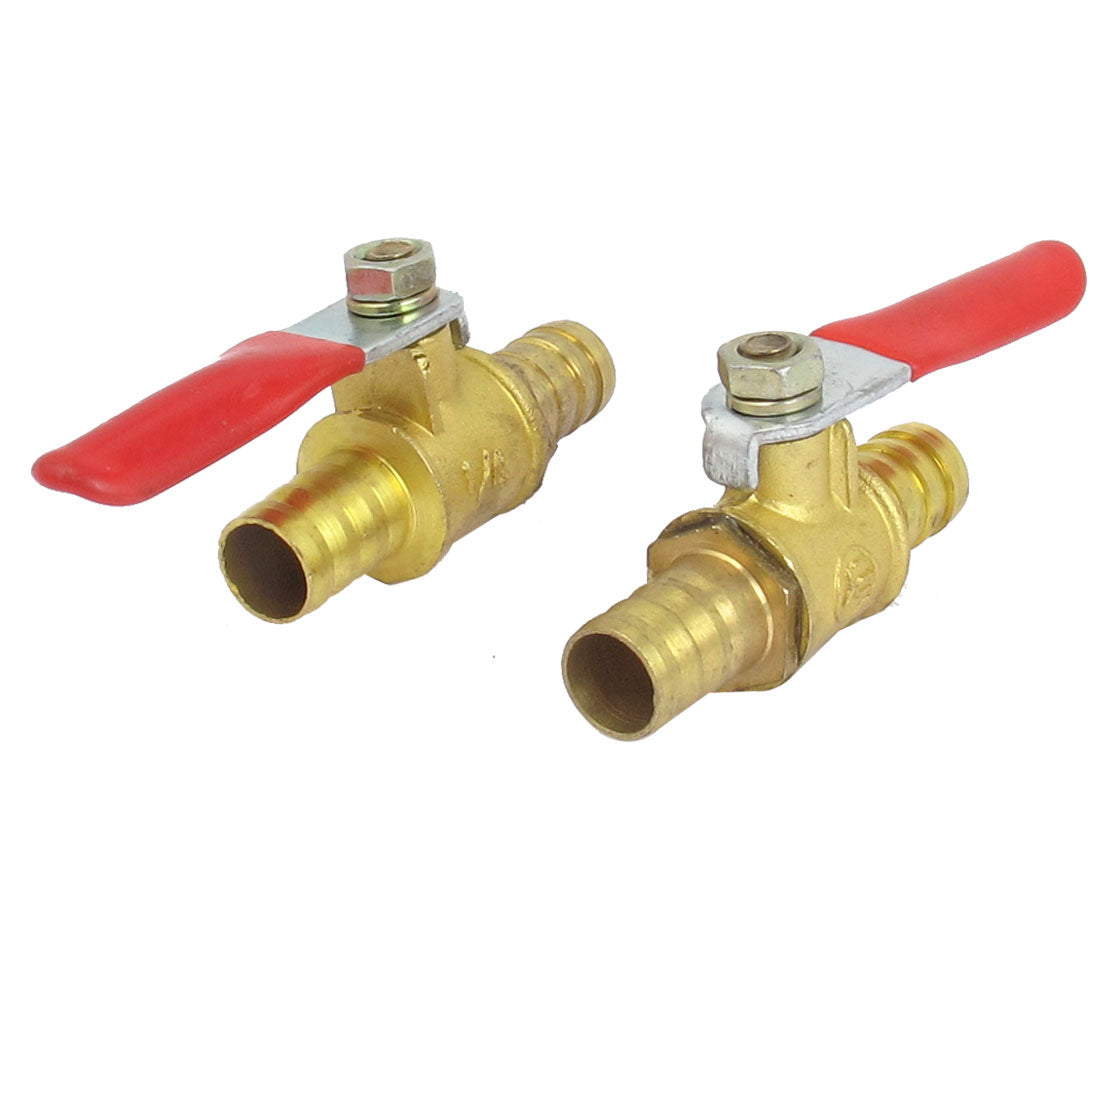 uxcell Uxcell 10mm Barb Outer Diameter Tail Red Lever Handle Brass Gas Ball Valve 2pcs